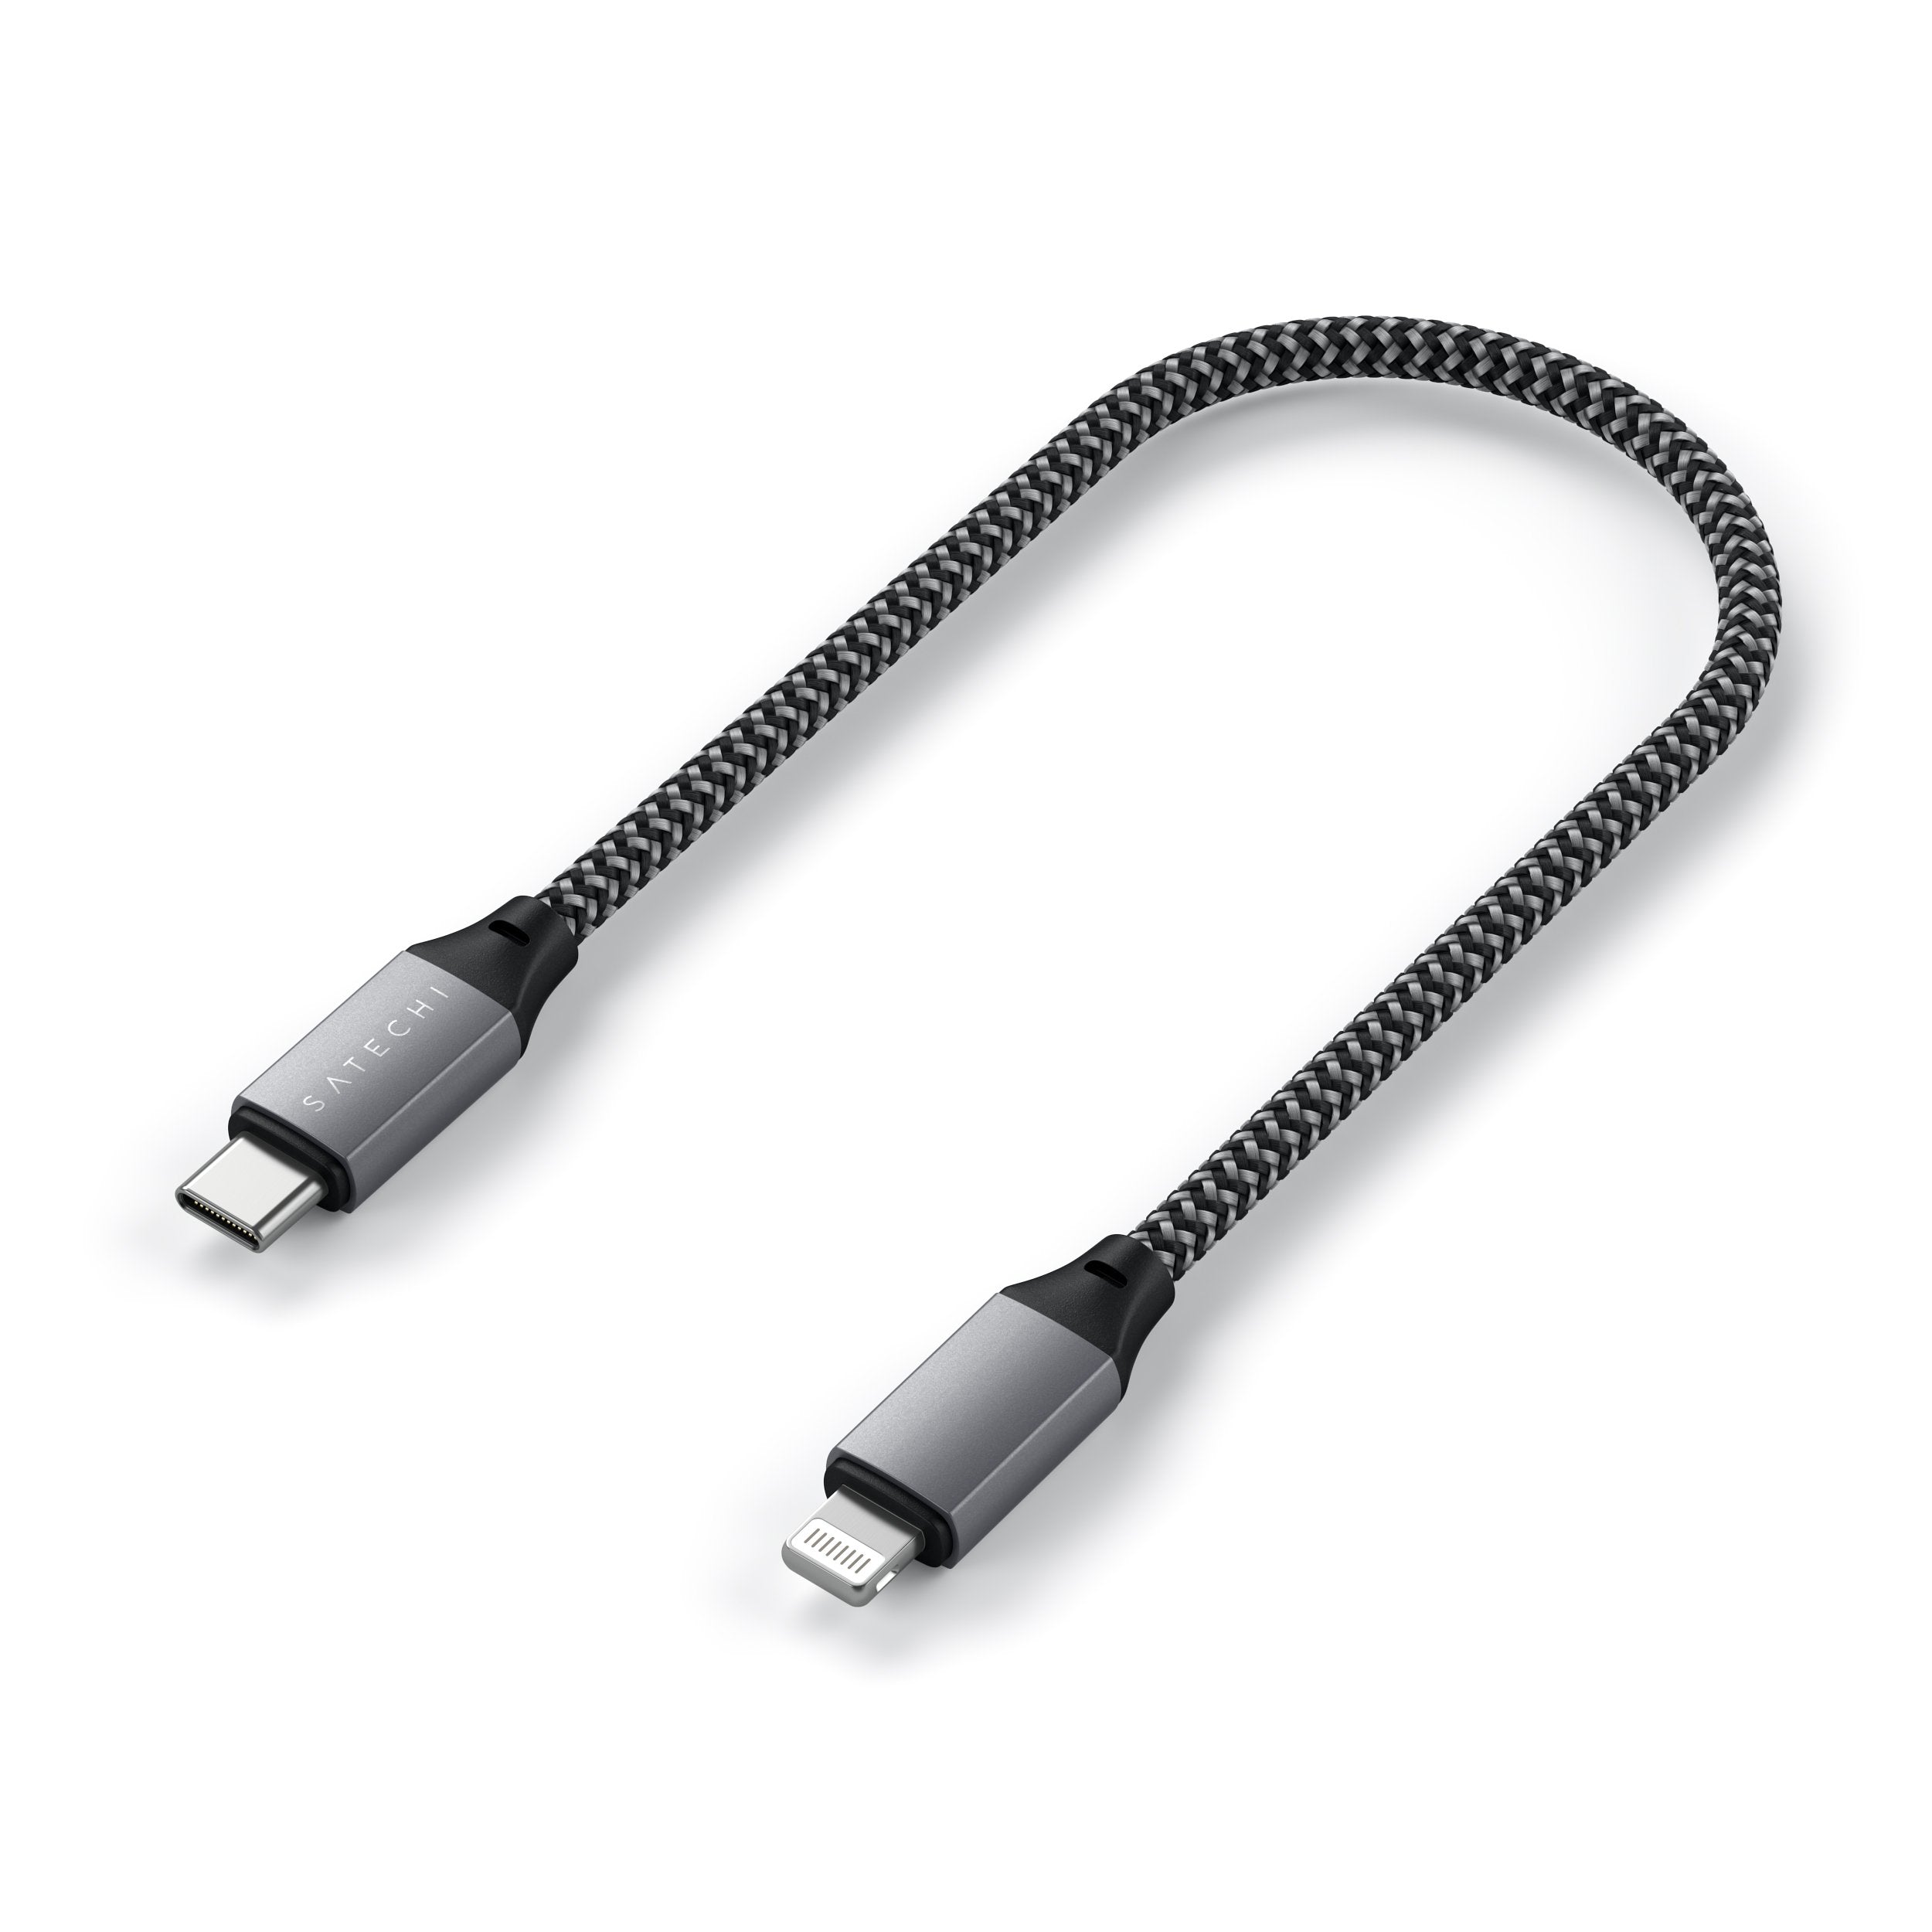 USB-C to Lightning Cable - 10 Inches Cables Satechi 